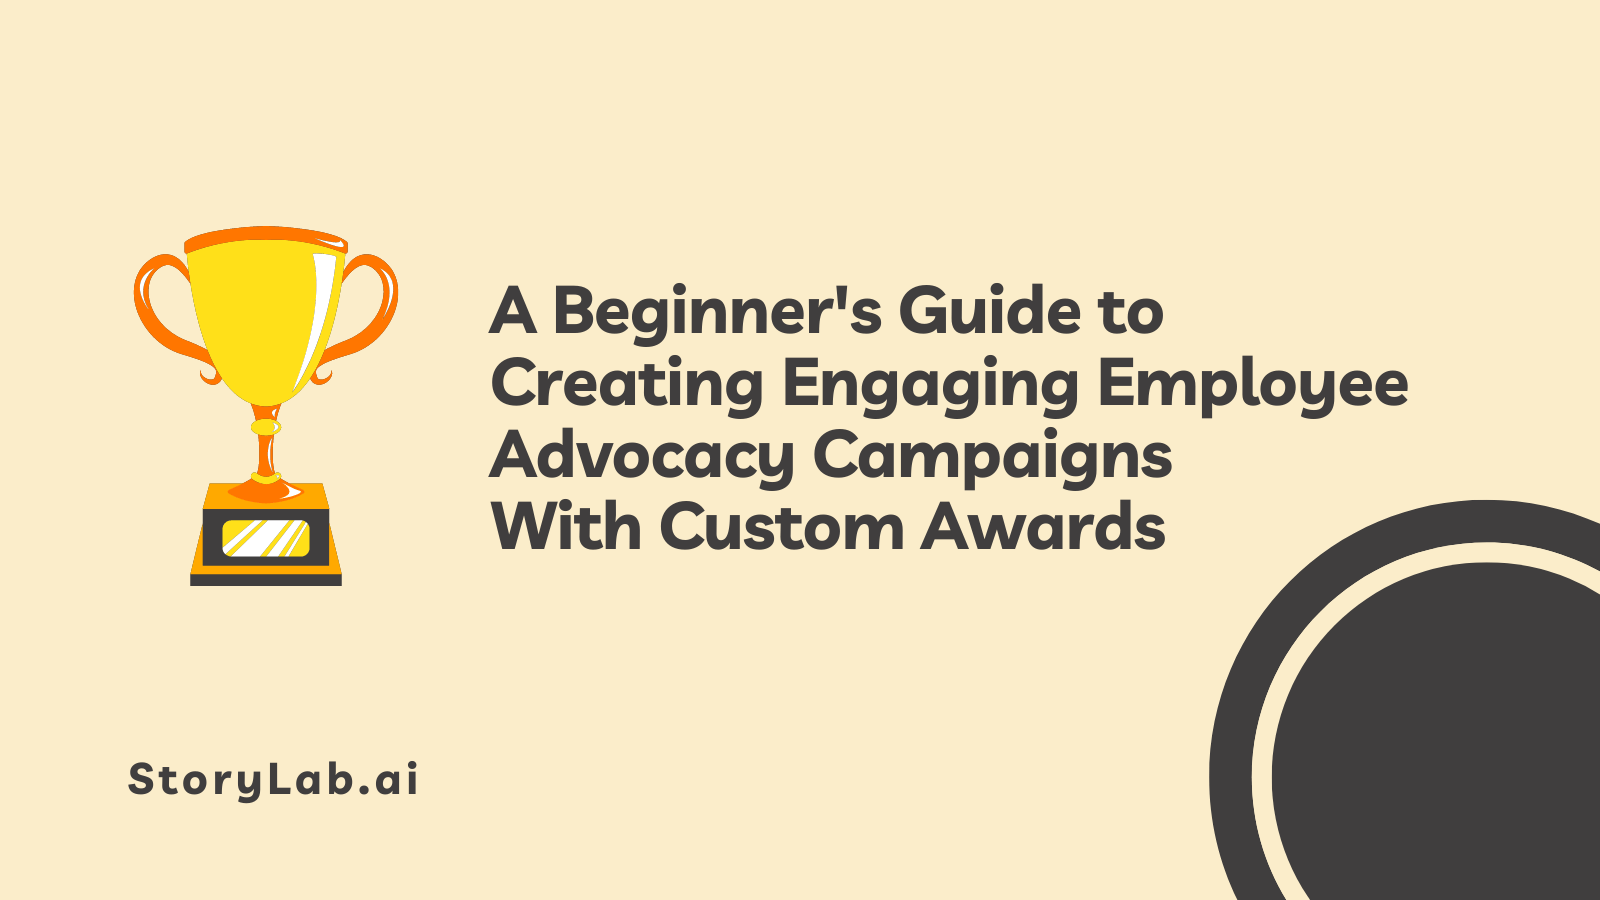 A Beginner's Guide to Creating Engaging Employee Advocacy Campaigns With Custom Awards